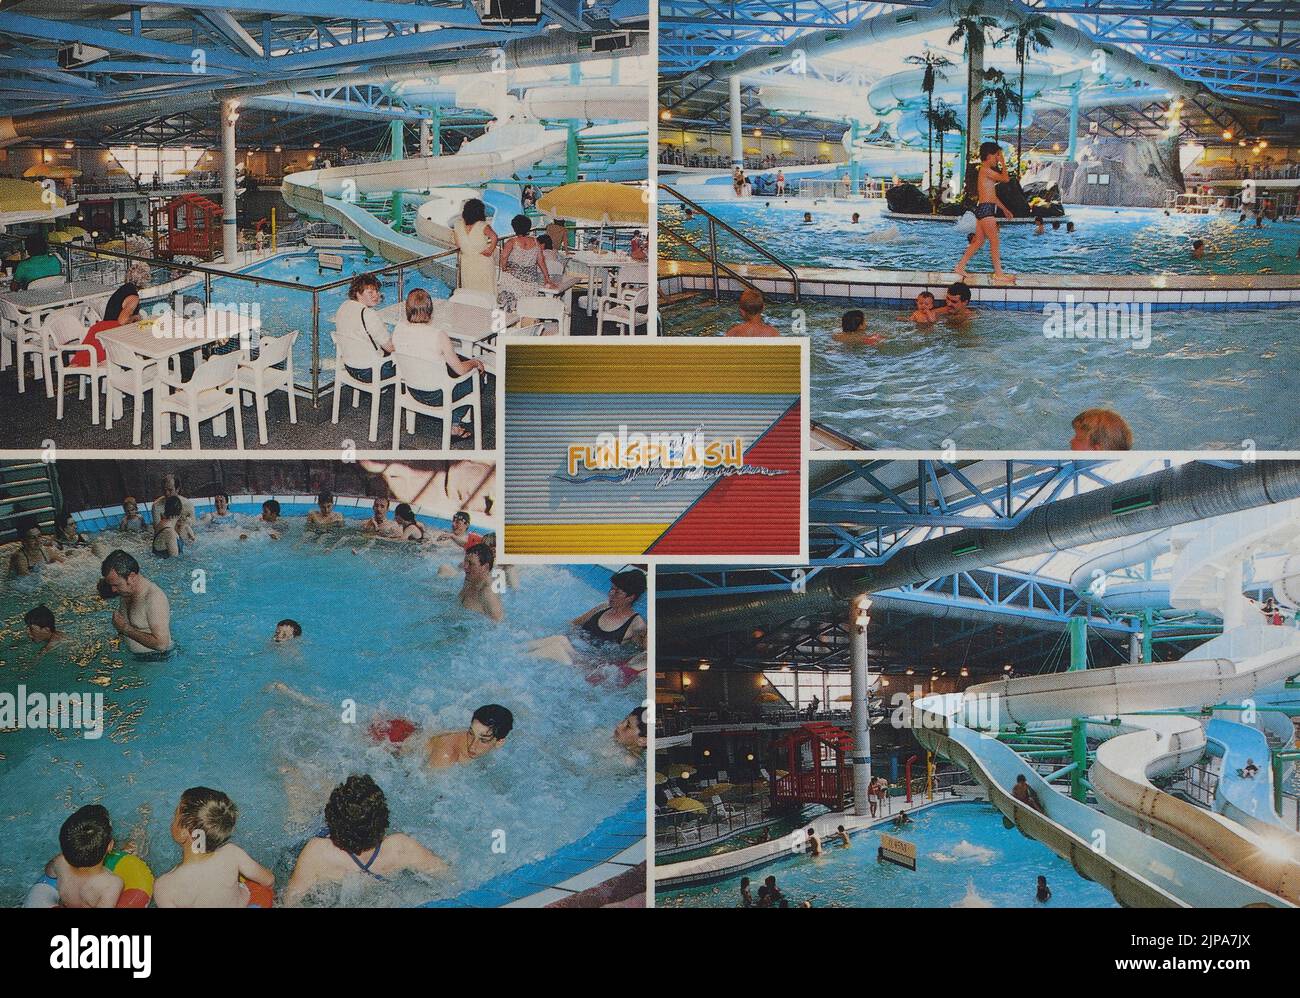 1980's postcard of Funcoast World showing Funsplash, the new indoor swimming pool complex. Butlins Skegness. Stock Photo